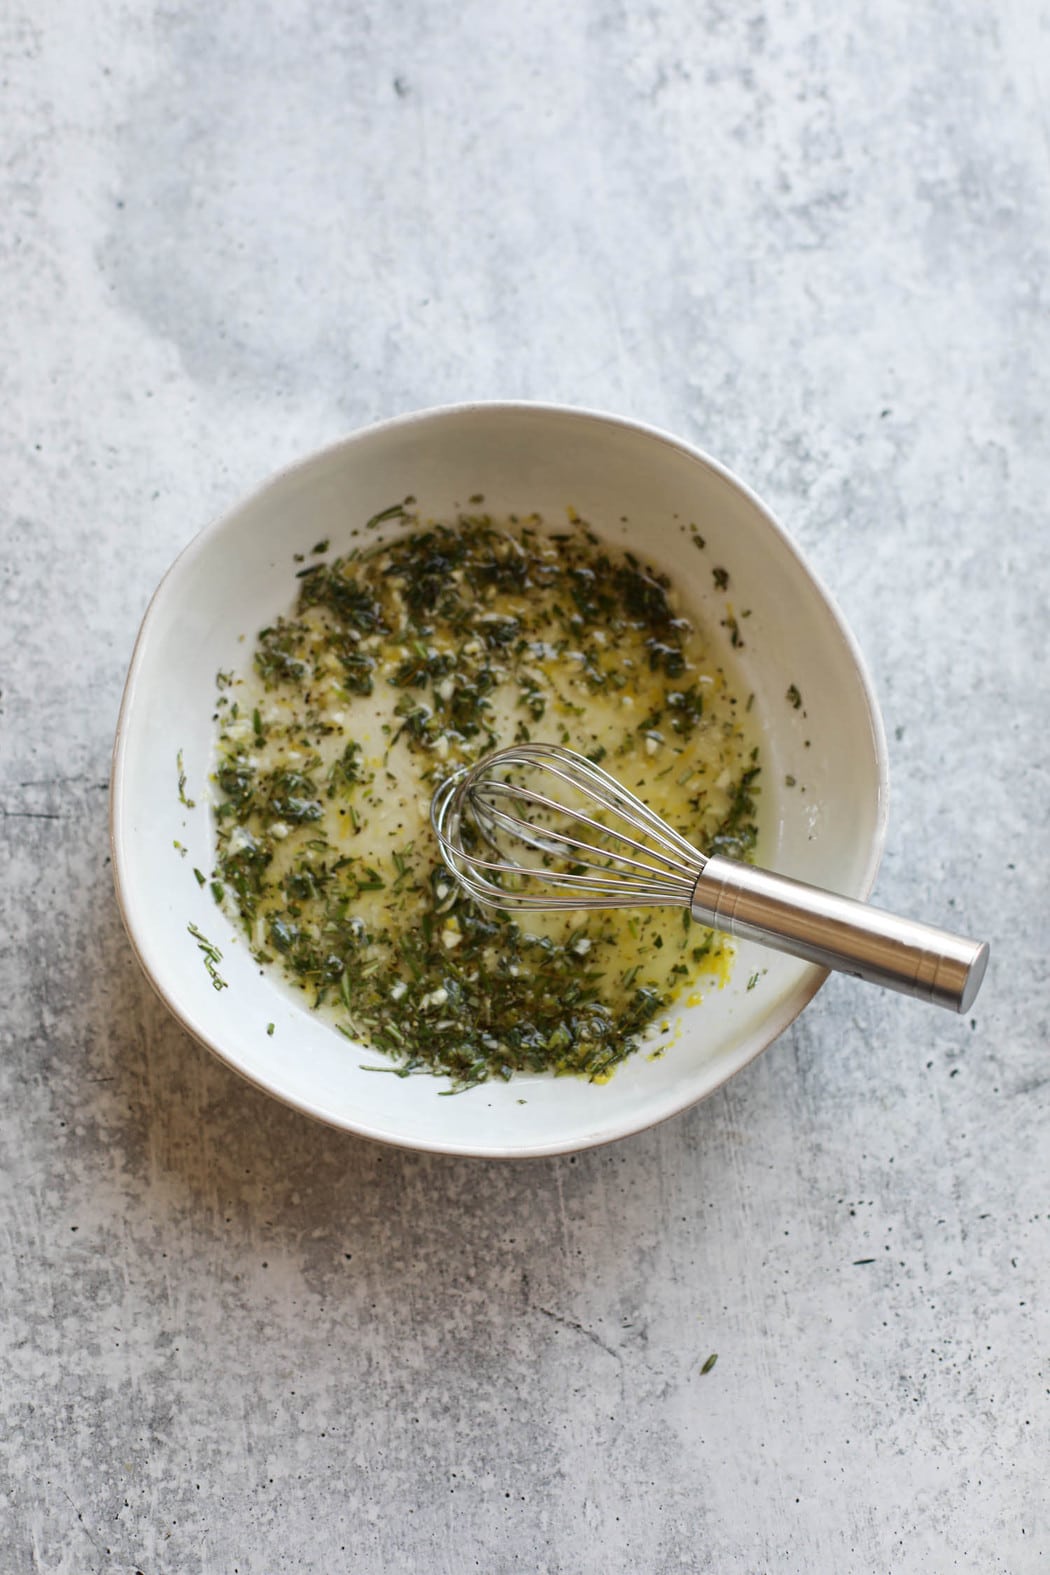 Overhead view of lemon herb chicken marinade in a white bowl with a whisk